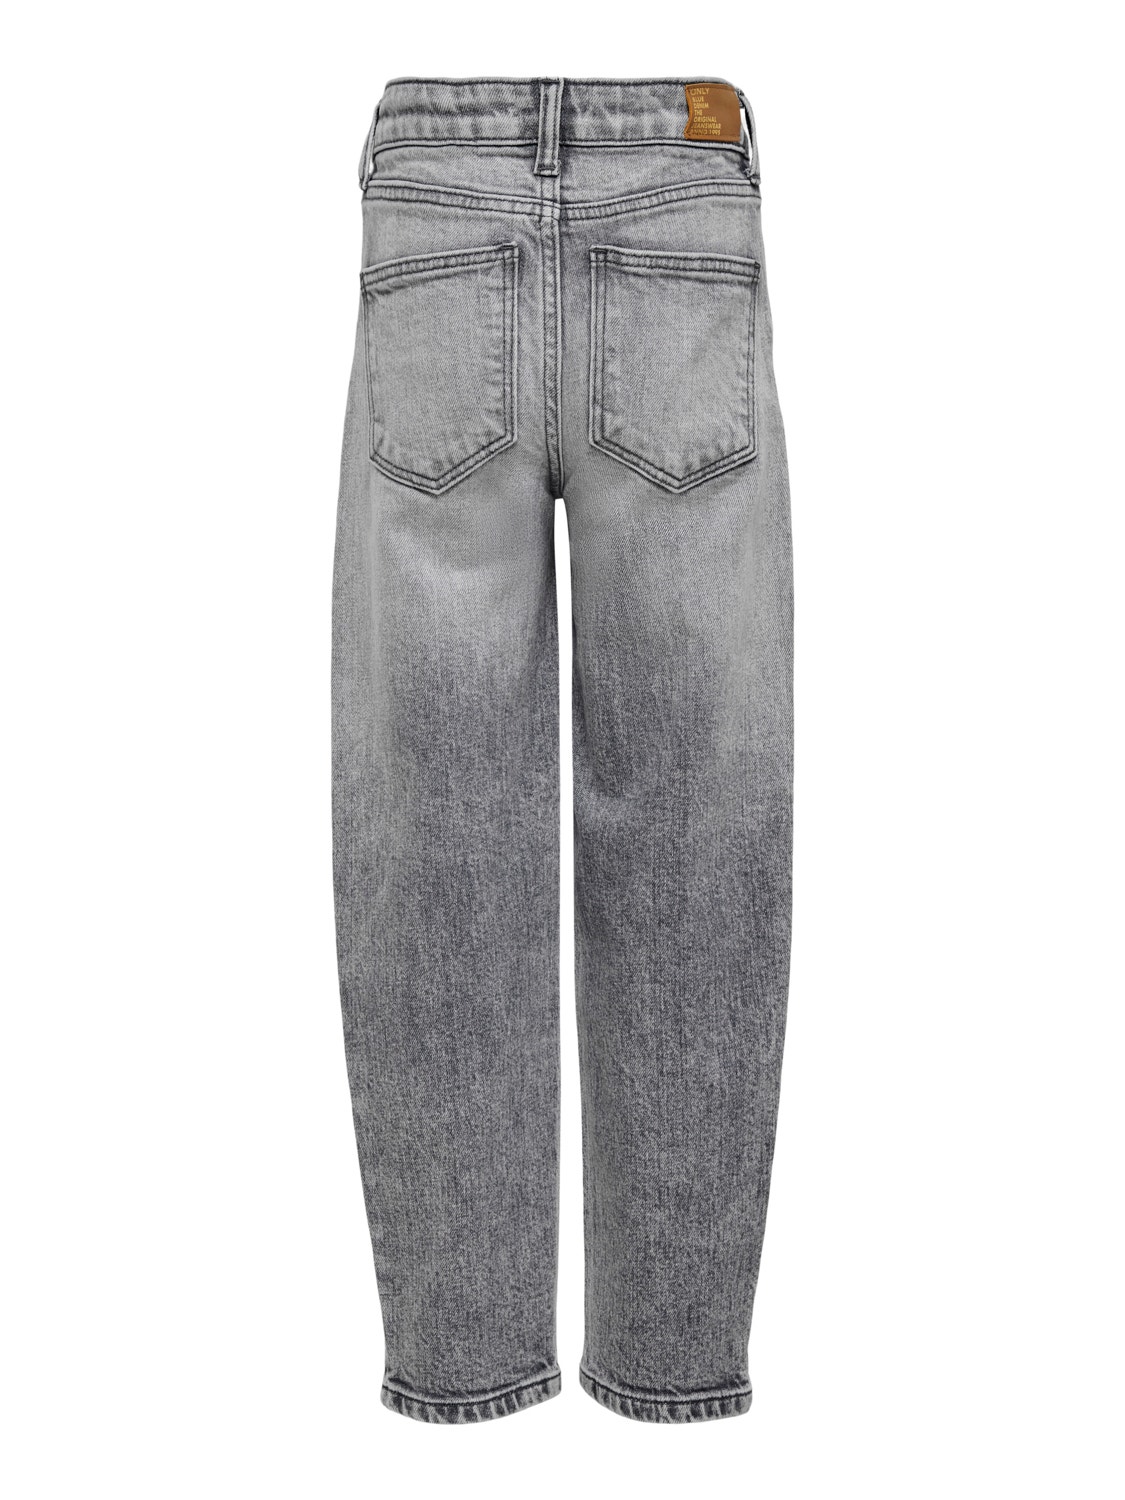 ONLY Jeans Regular Fit Taille moyenne -Light Grey Denim - 15236640